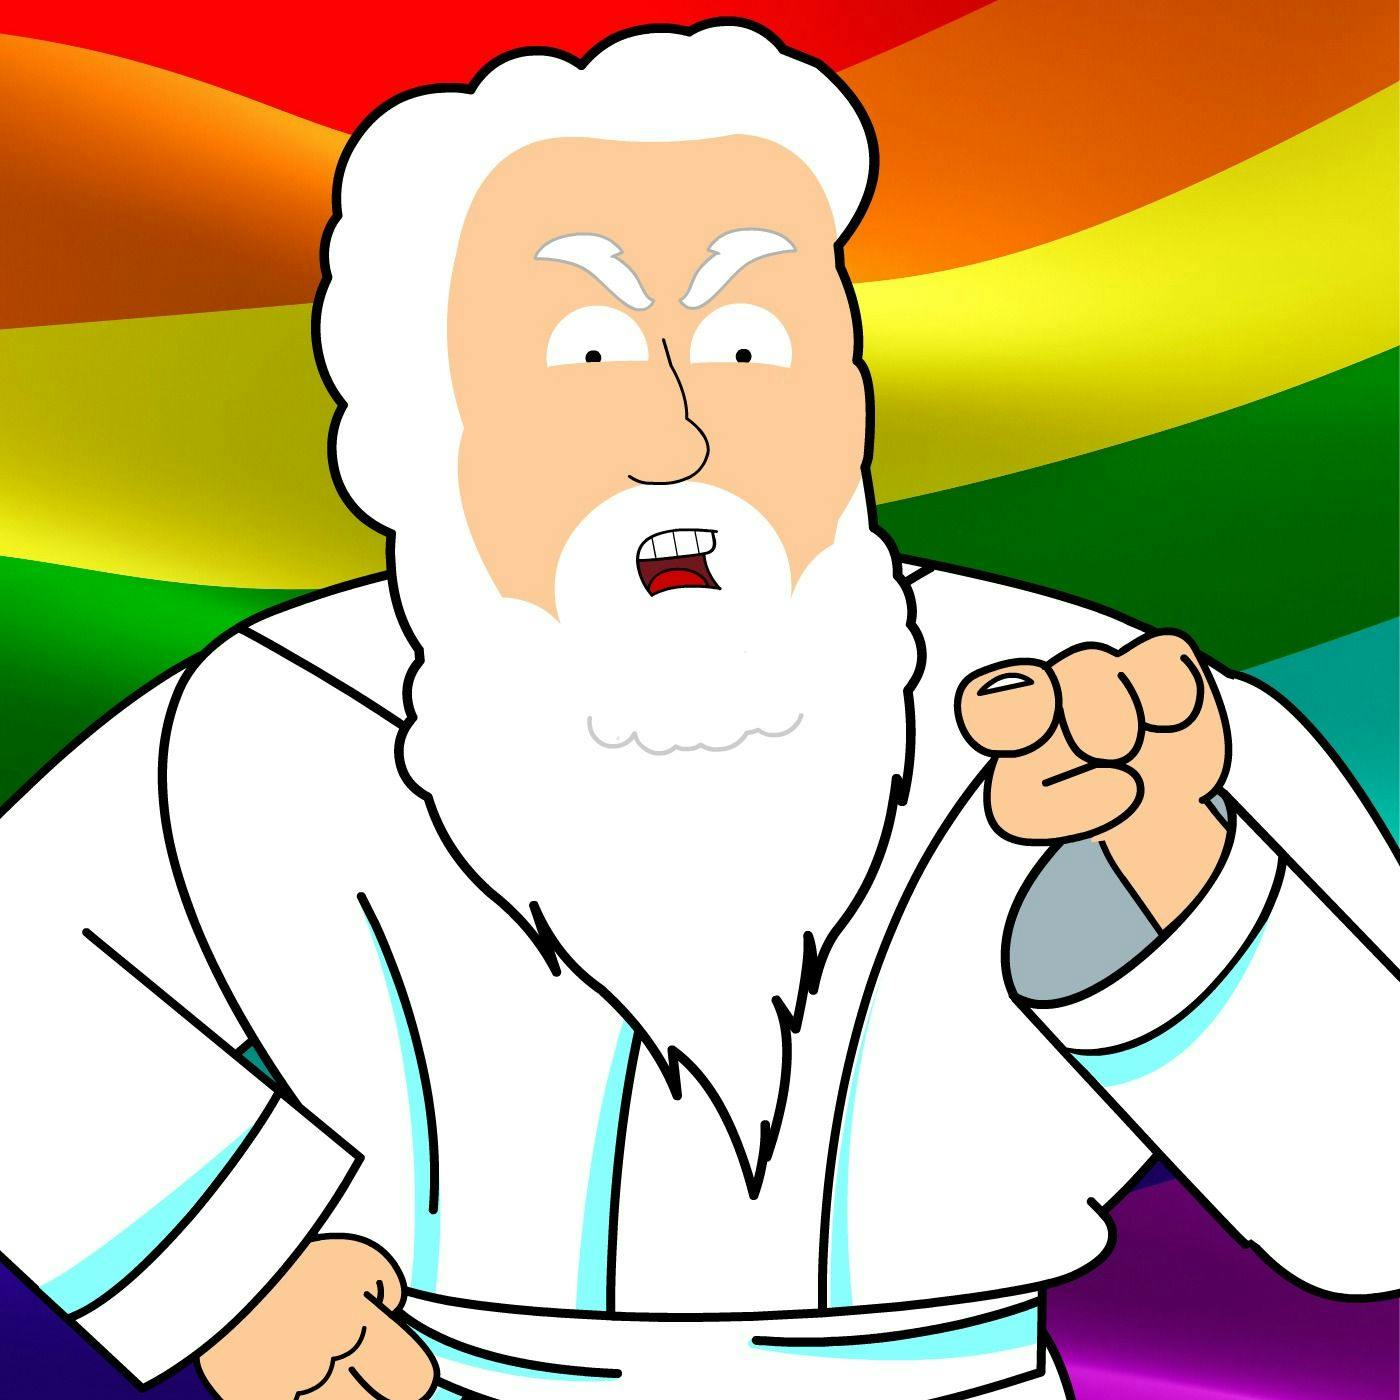 God Commands Humans To Say Gay!